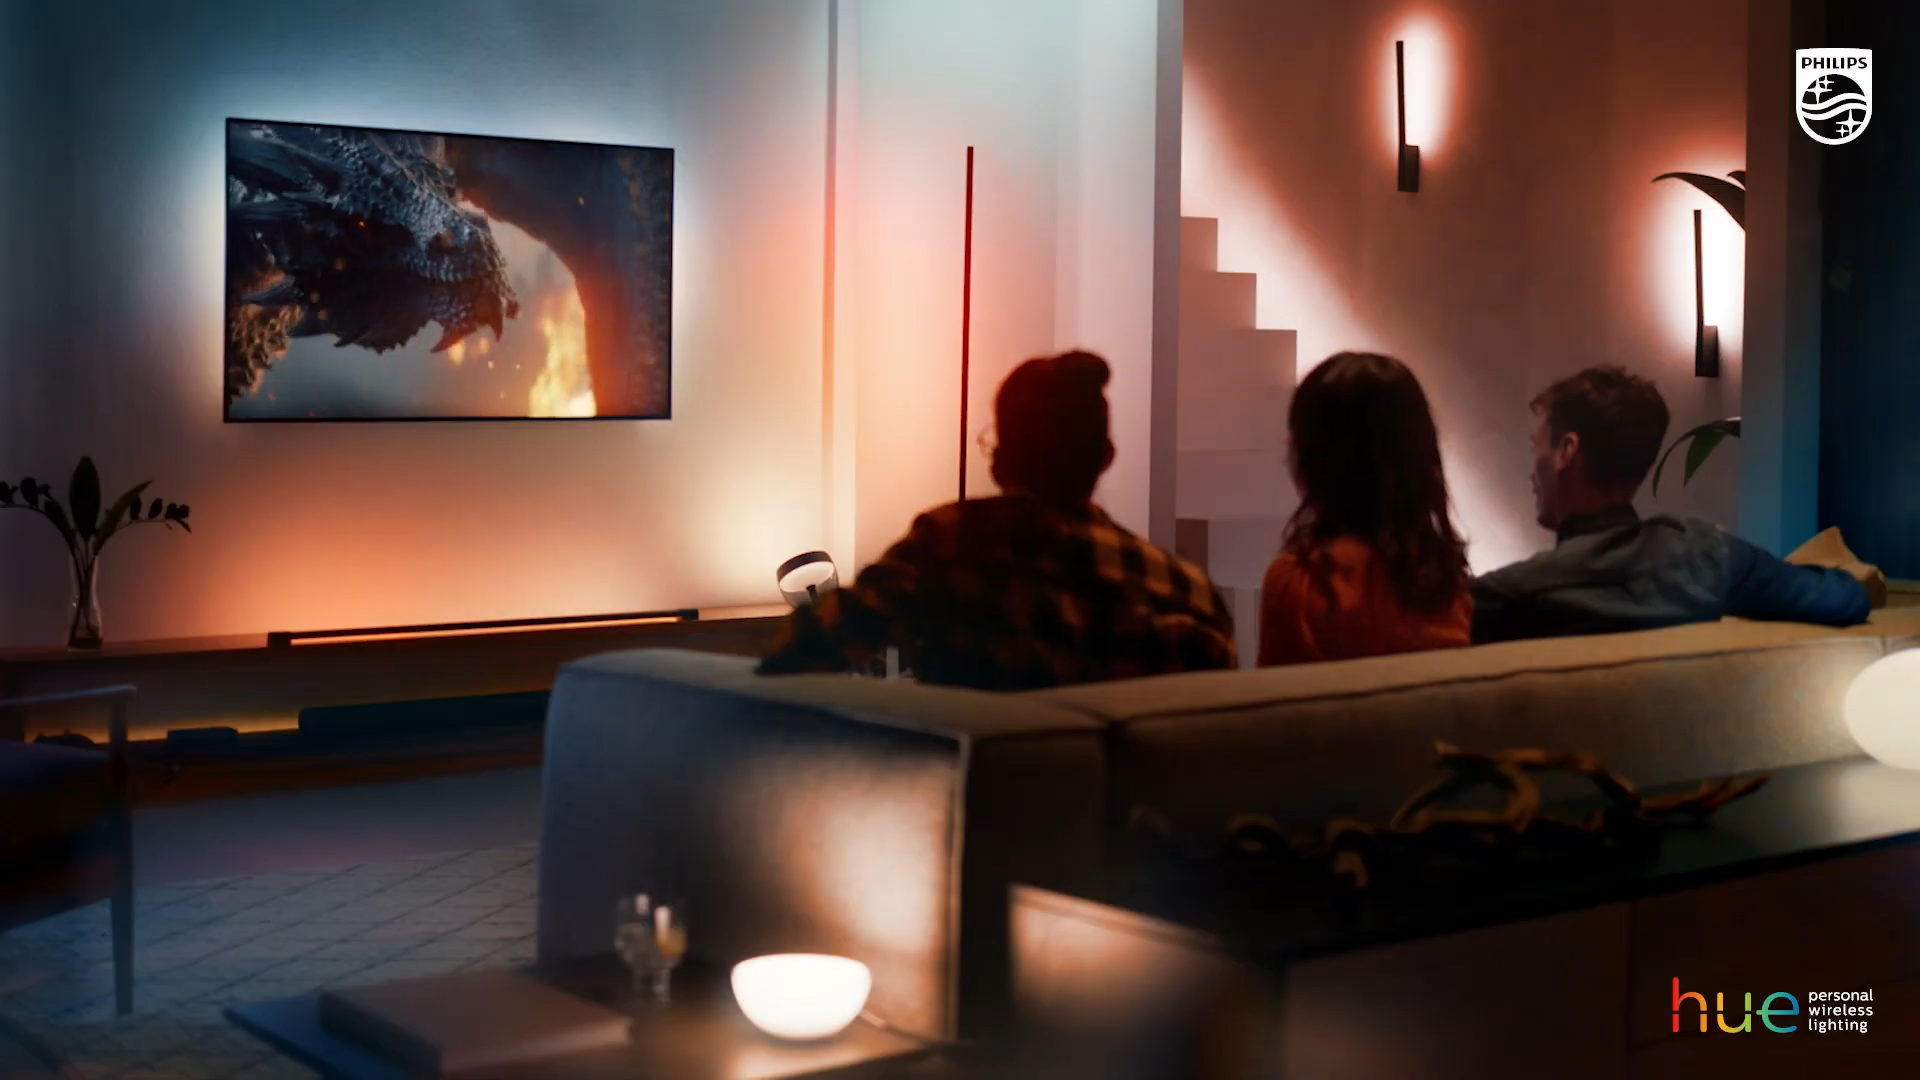 Philips released Hue Sync TV app.. for Samsung TVs only :( : r/LGOLED